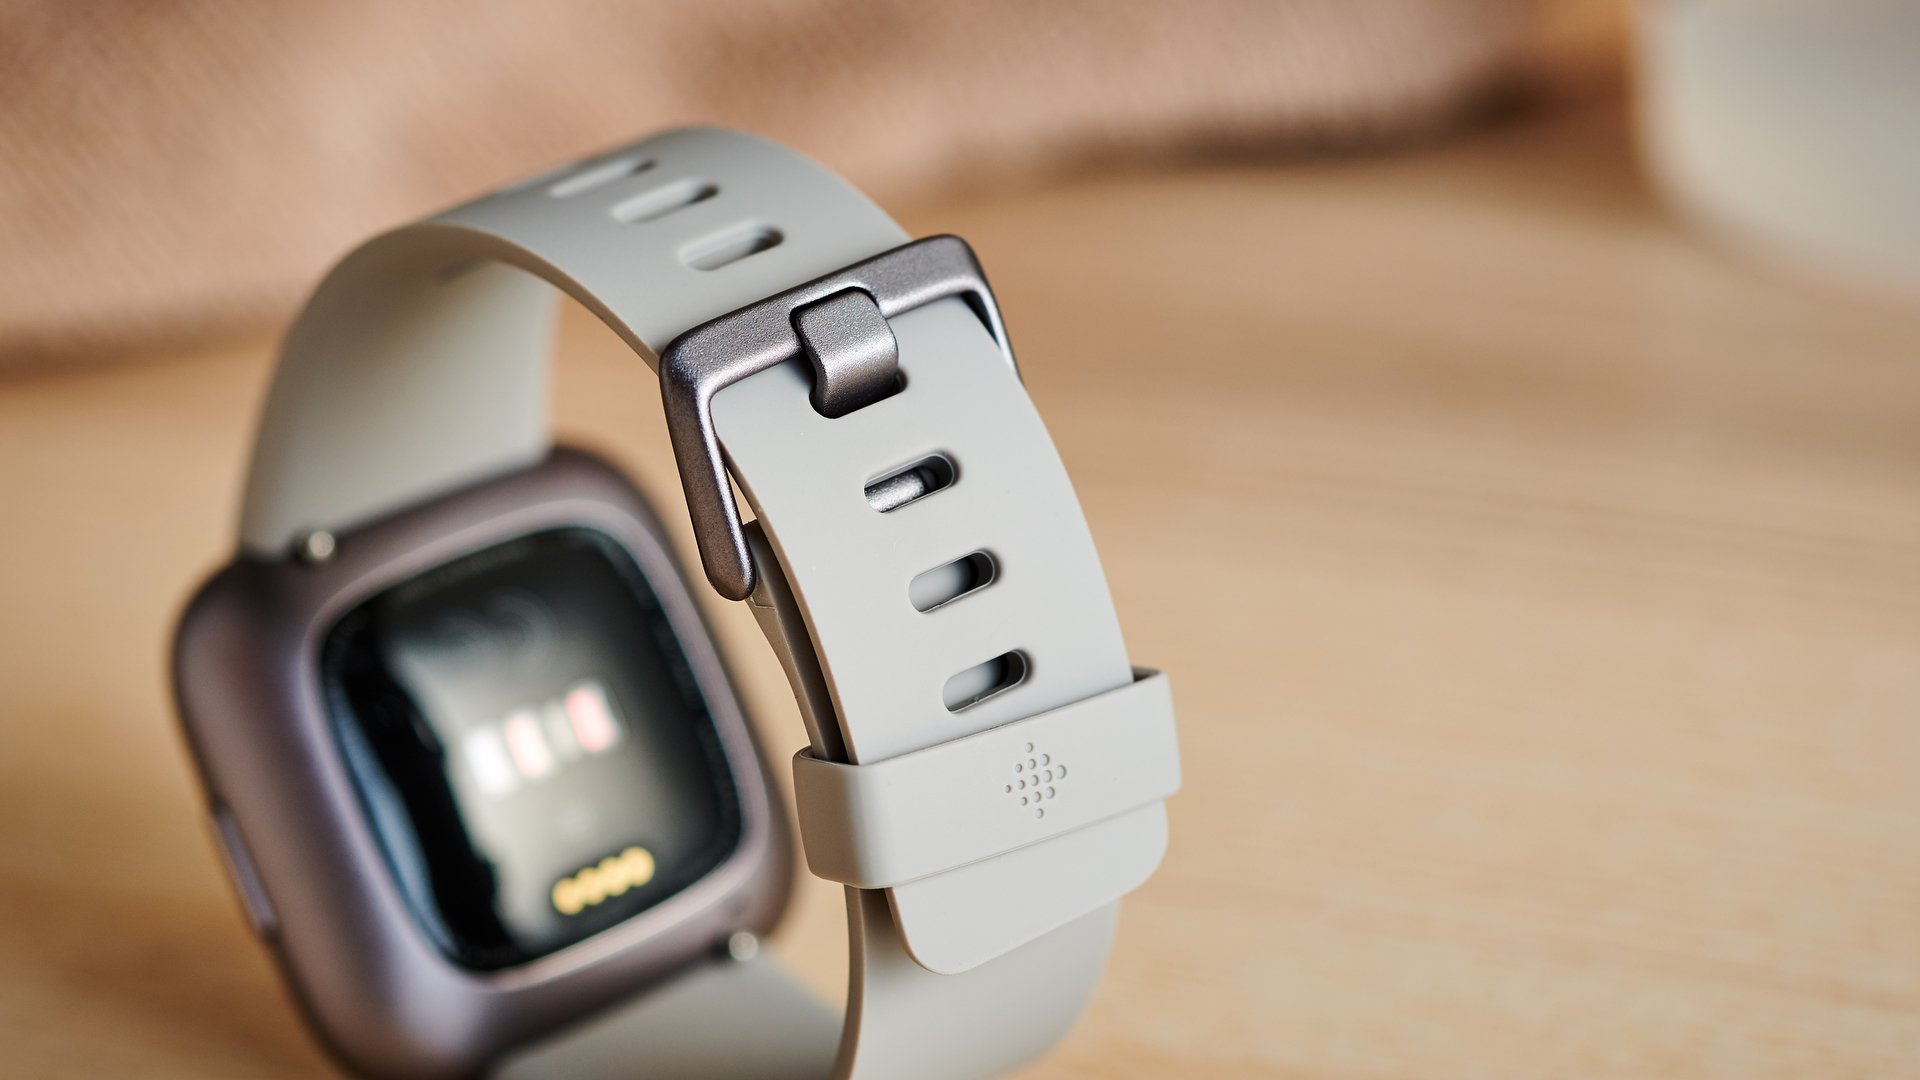 The new Versa 2 looks like it will rival any high-end smartwatch